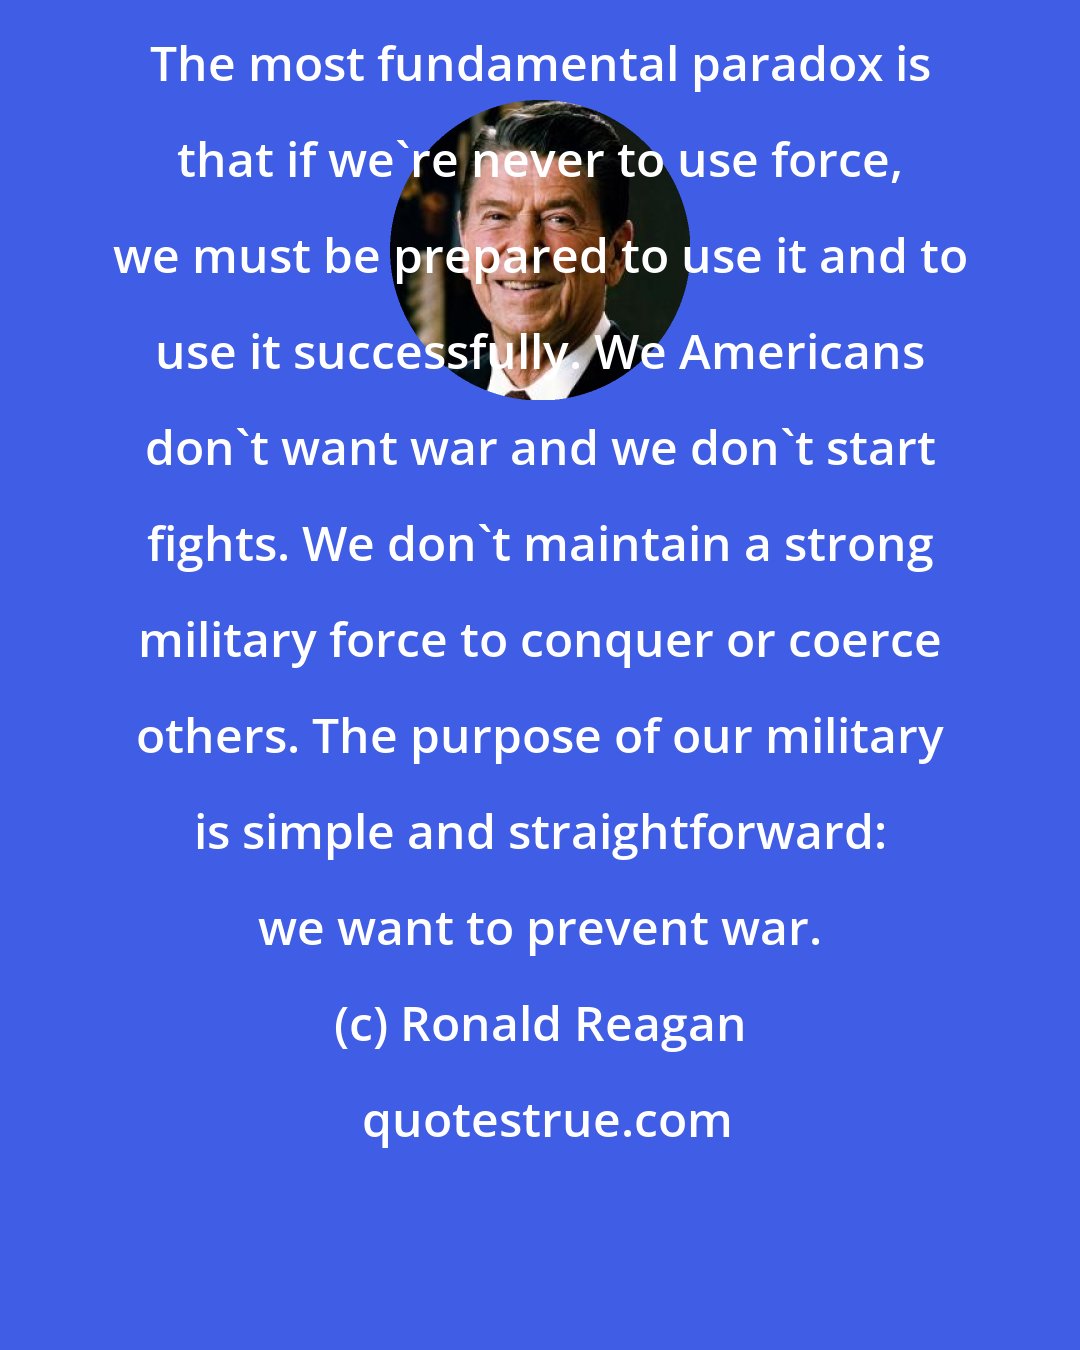 Ronald Reagan: The most fundamental paradox is that if we're never to use force, we must be prepared to use it and to use it successfully. We Americans don't want war and we don't start fights. We don't maintain a strong military force to conquer or coerce others. The purpose of our military is simple and straightforward: we want to prevent war.